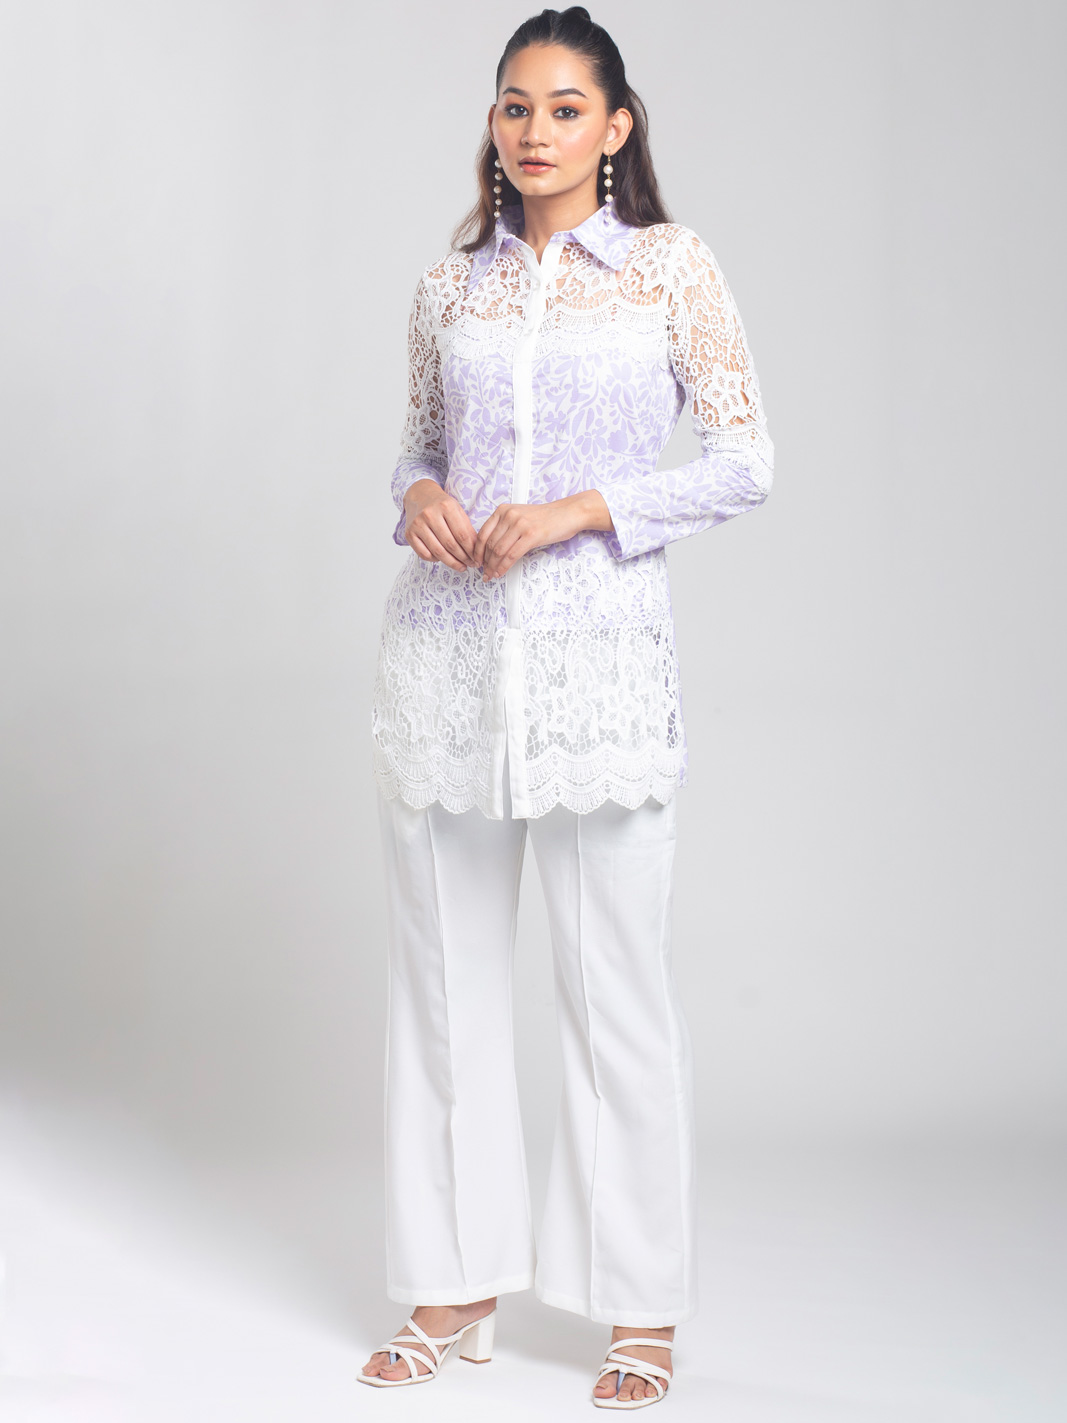 LAVENDER & WHITE EMBROIDERY CO ORD SET